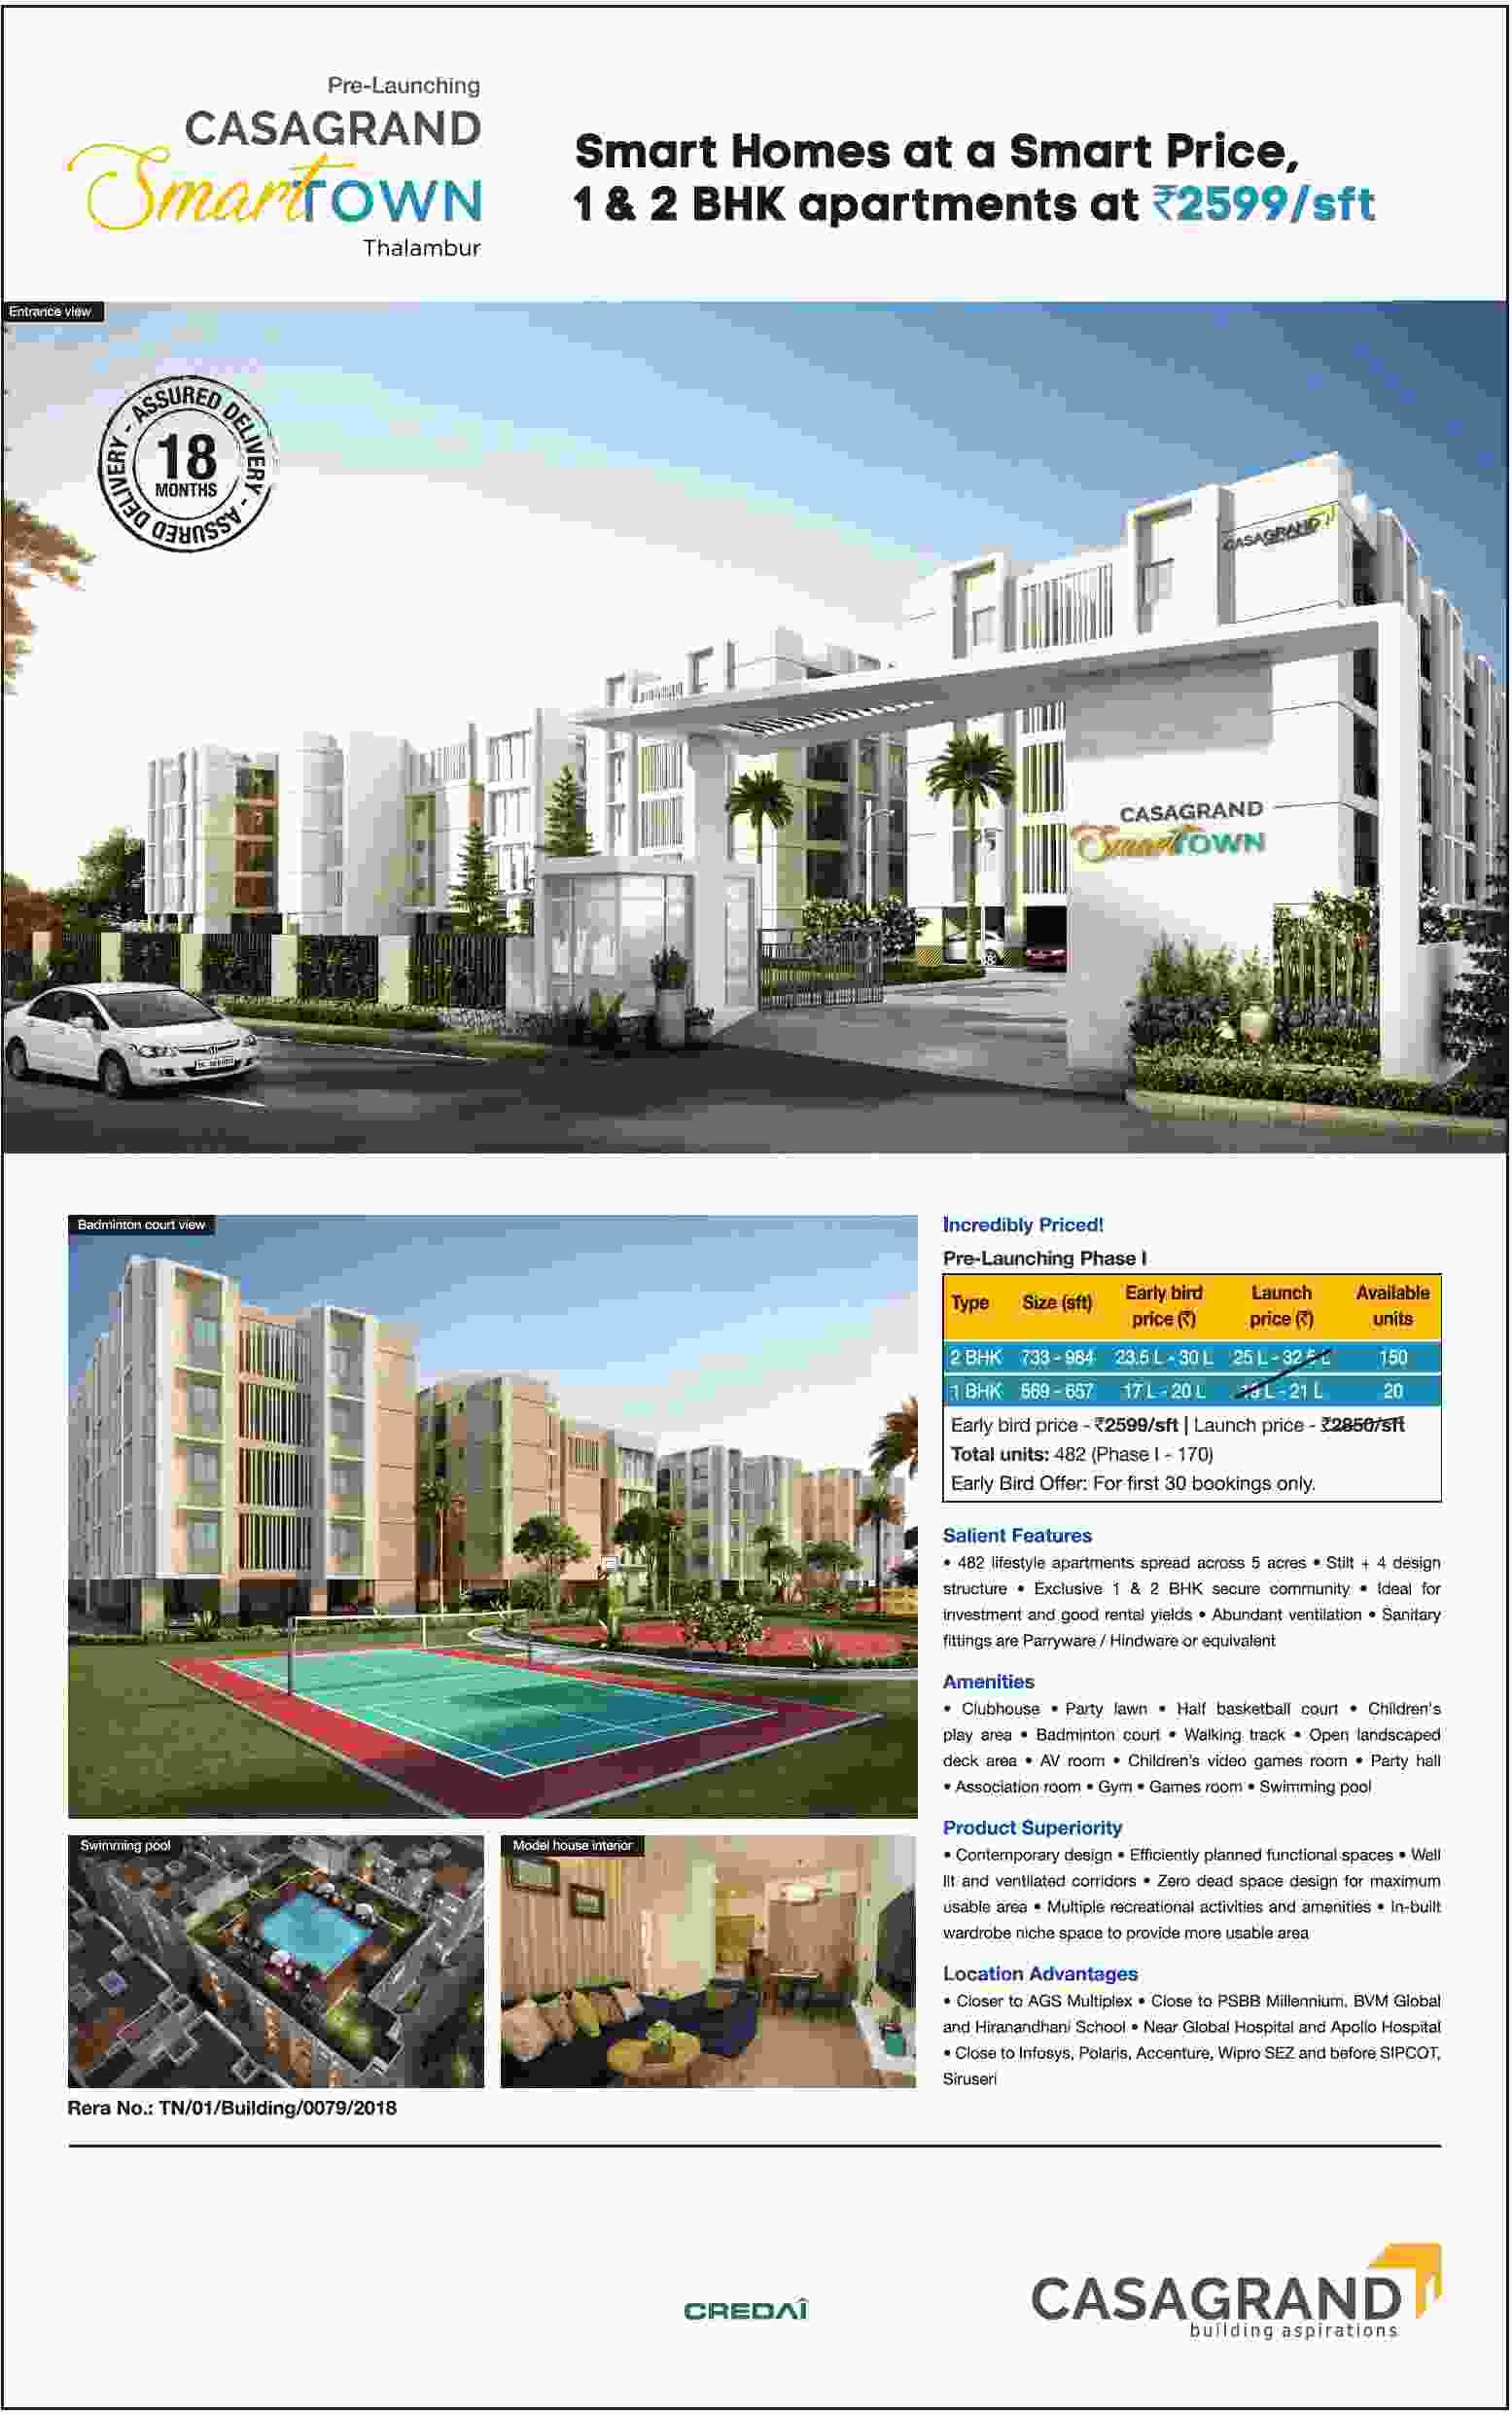 Smart Homes At A Smart Price At Rs- 2599/sq.ft At Casagrand Smart Town, Chennai Update